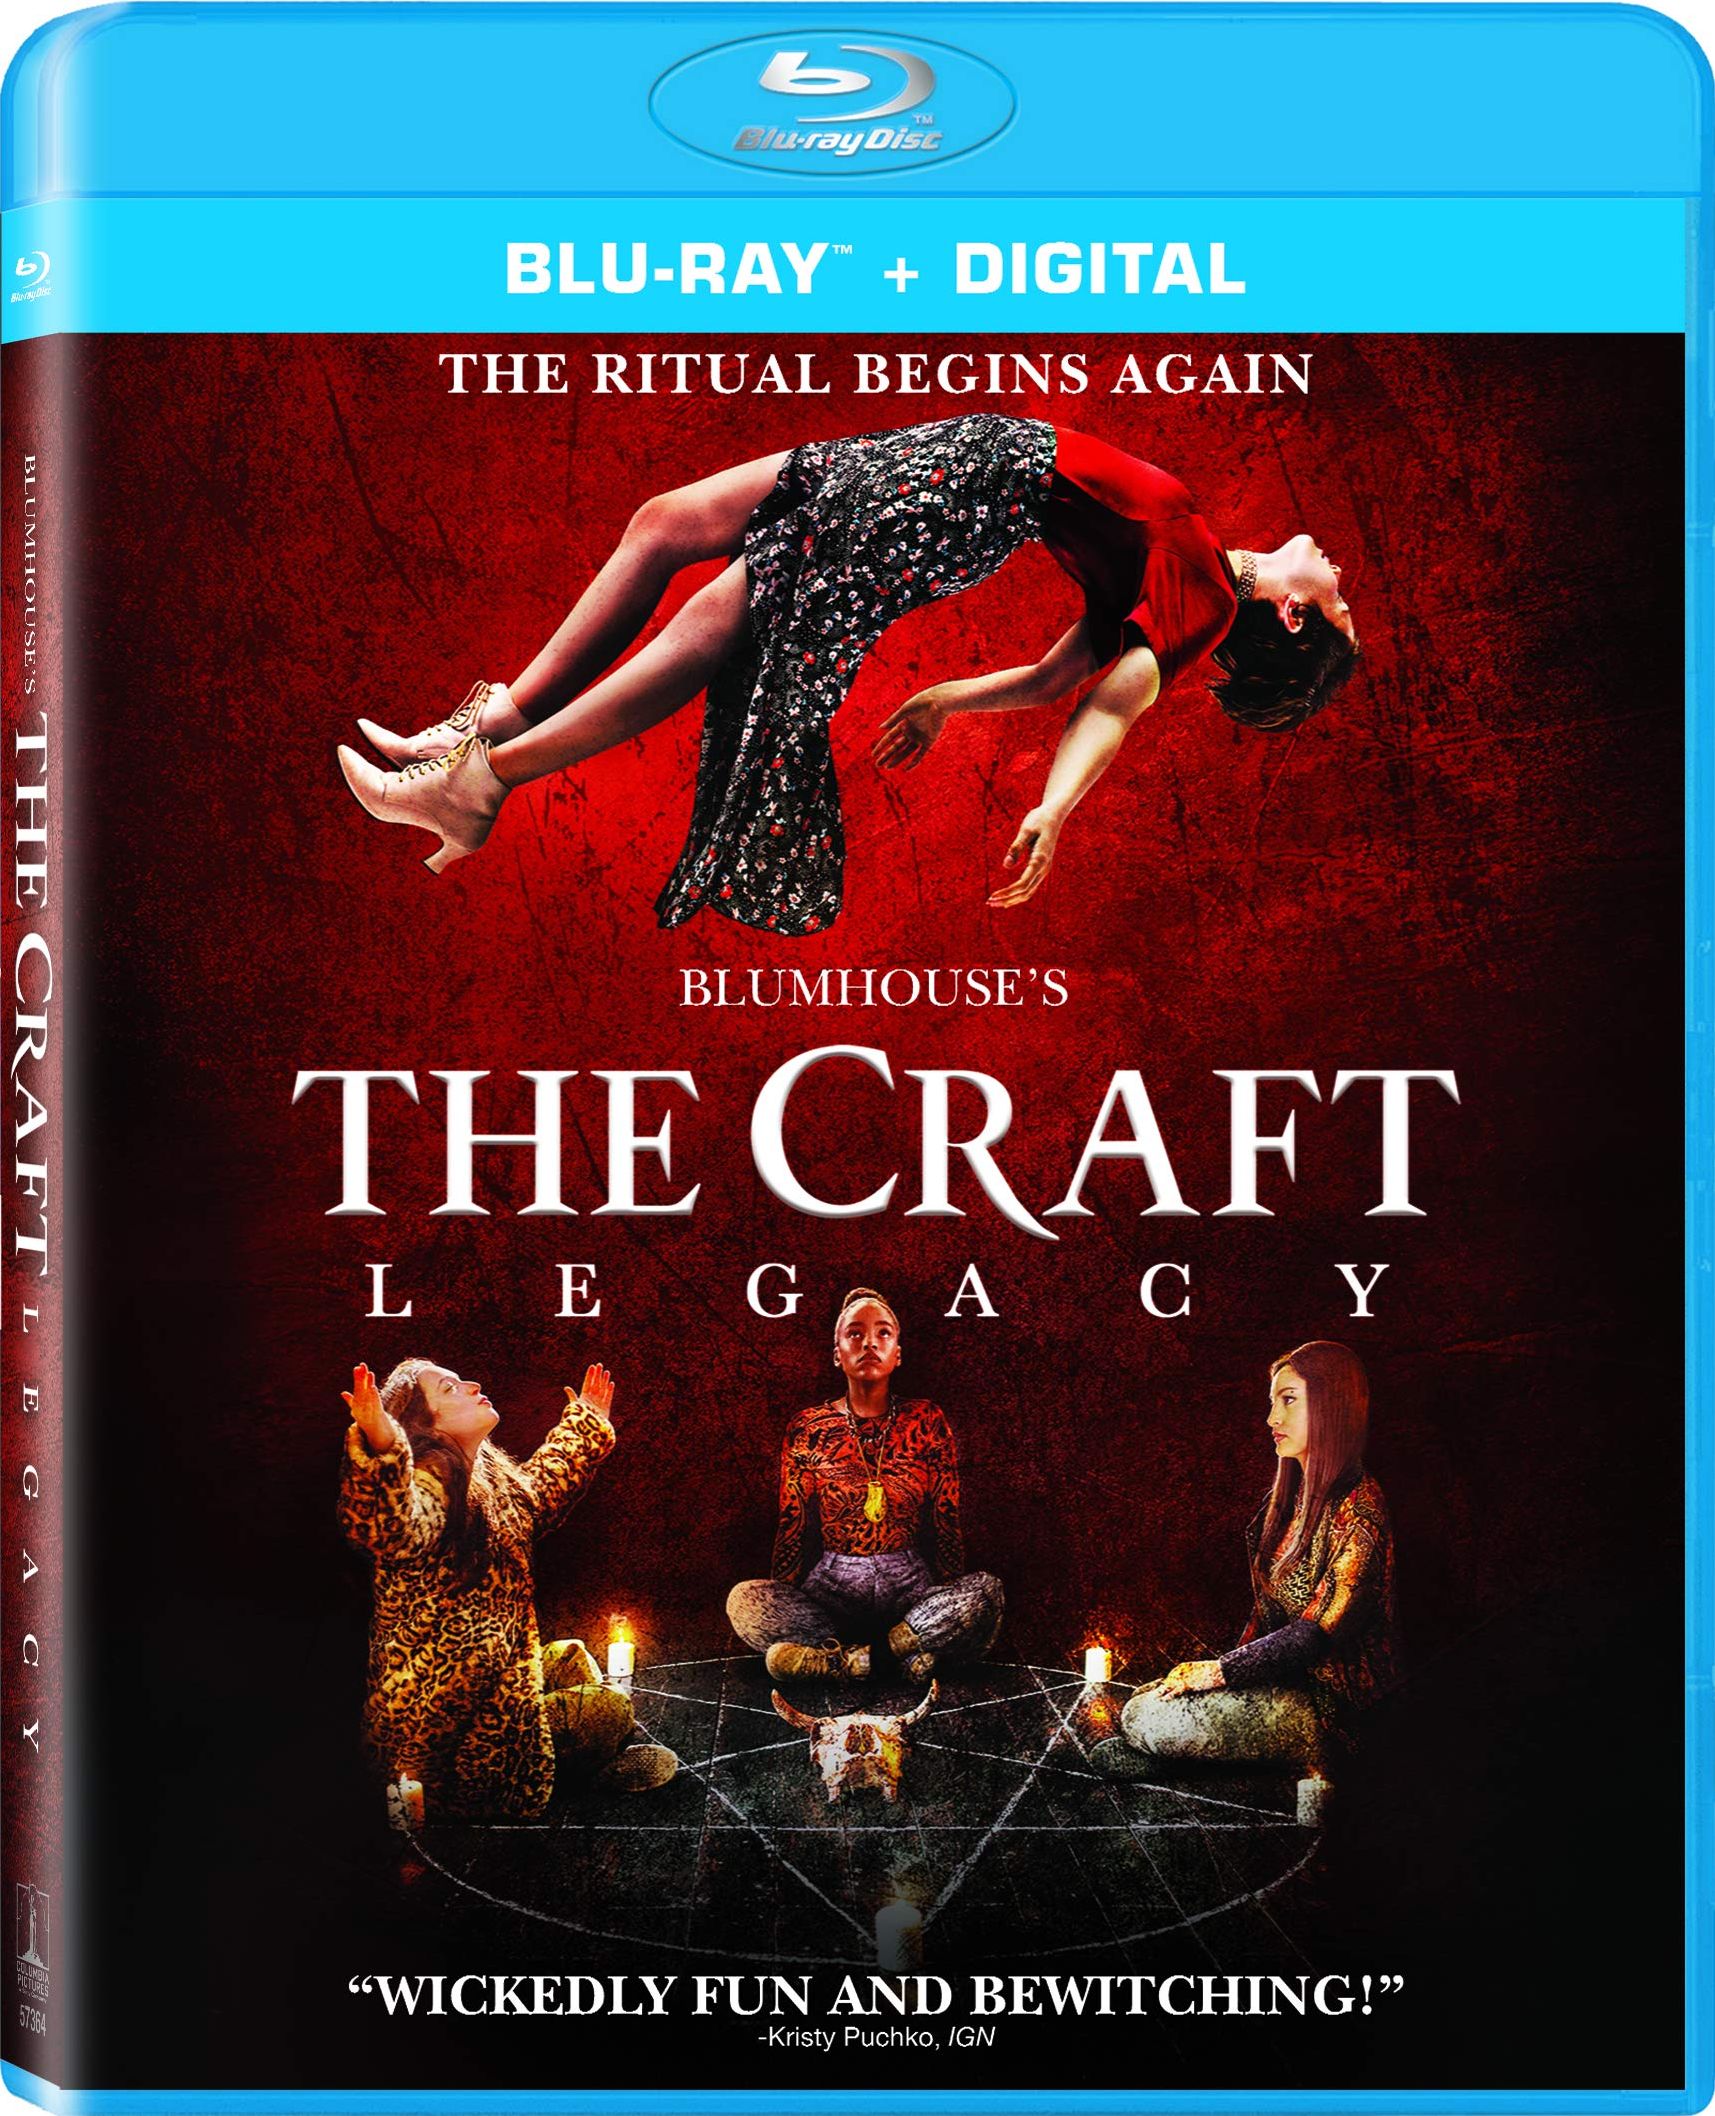 The Craft Legacy DVD Release Date December 22 2020.